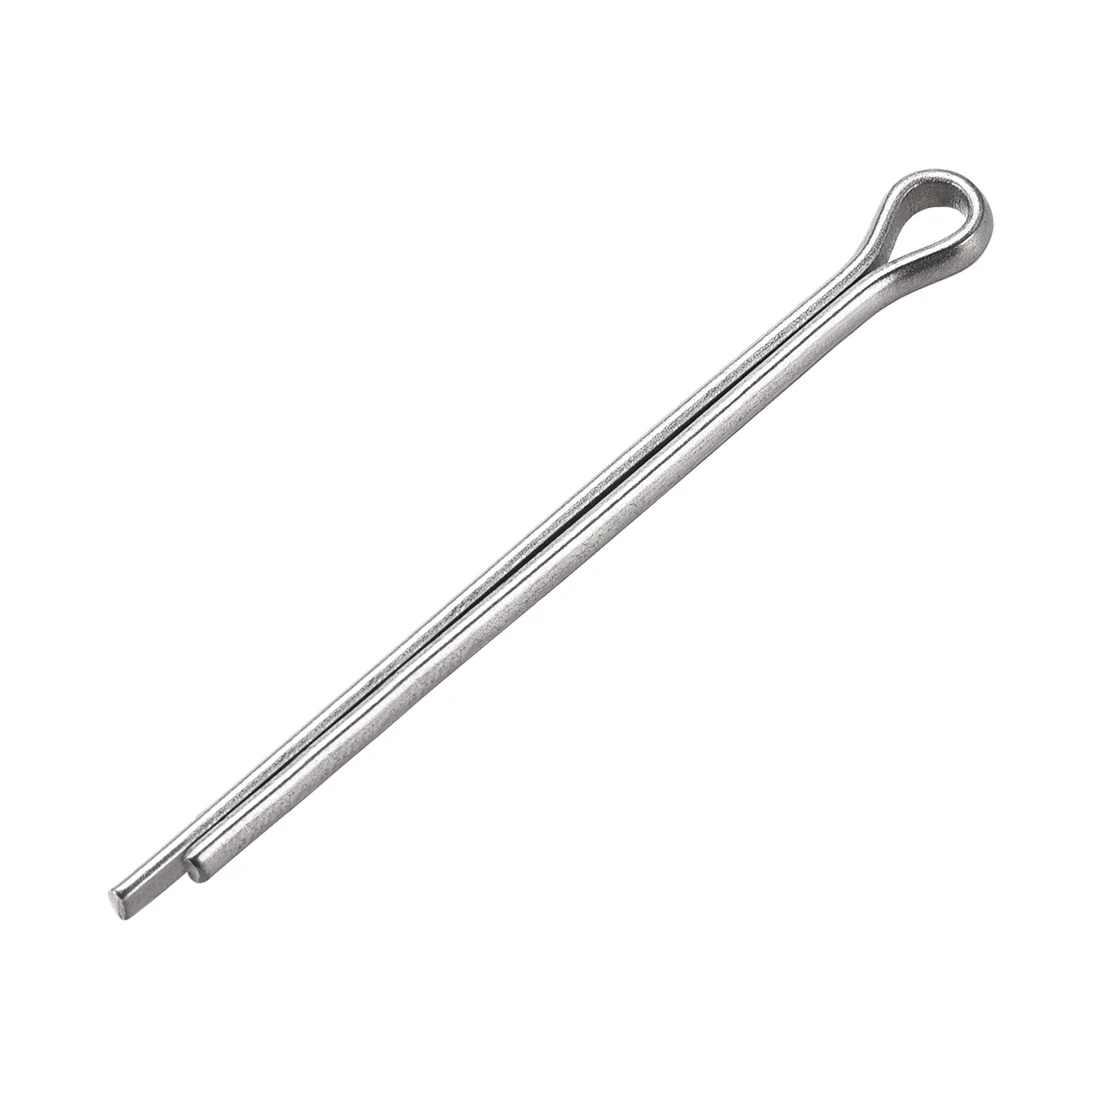 

30Pcs Split Cotter Pin - 3mm x 45mm 304 Stainless Steel 2-Prongs Silver Tone for Secure Clevis Pins,Castle Nuts